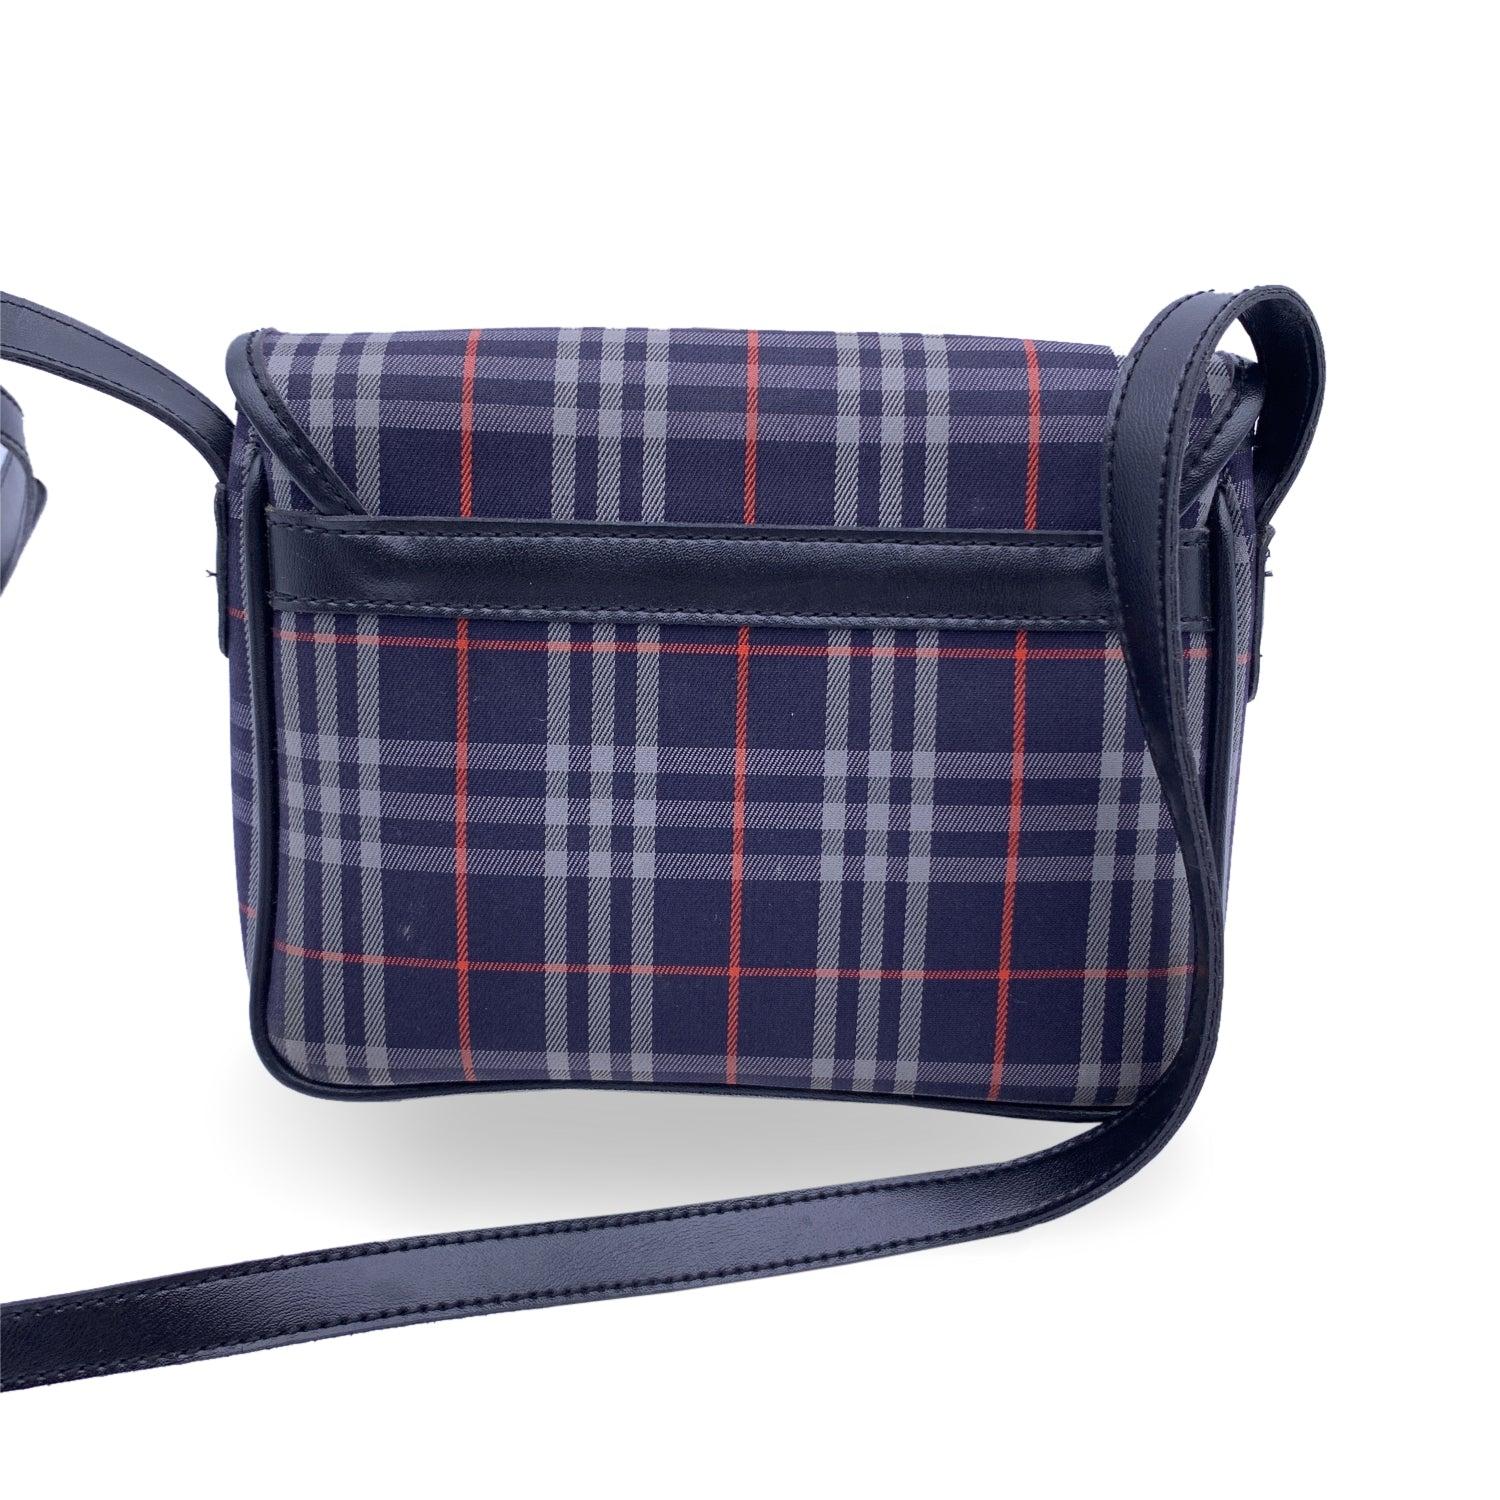 This beautiful Bag will come with a Certificate of Authenticity provided by Entrupy. The certificate will be provided at no further cost Burberry Messenger bg in iconic nova check plaid canvas in blue color with blue leather trim and adjustable